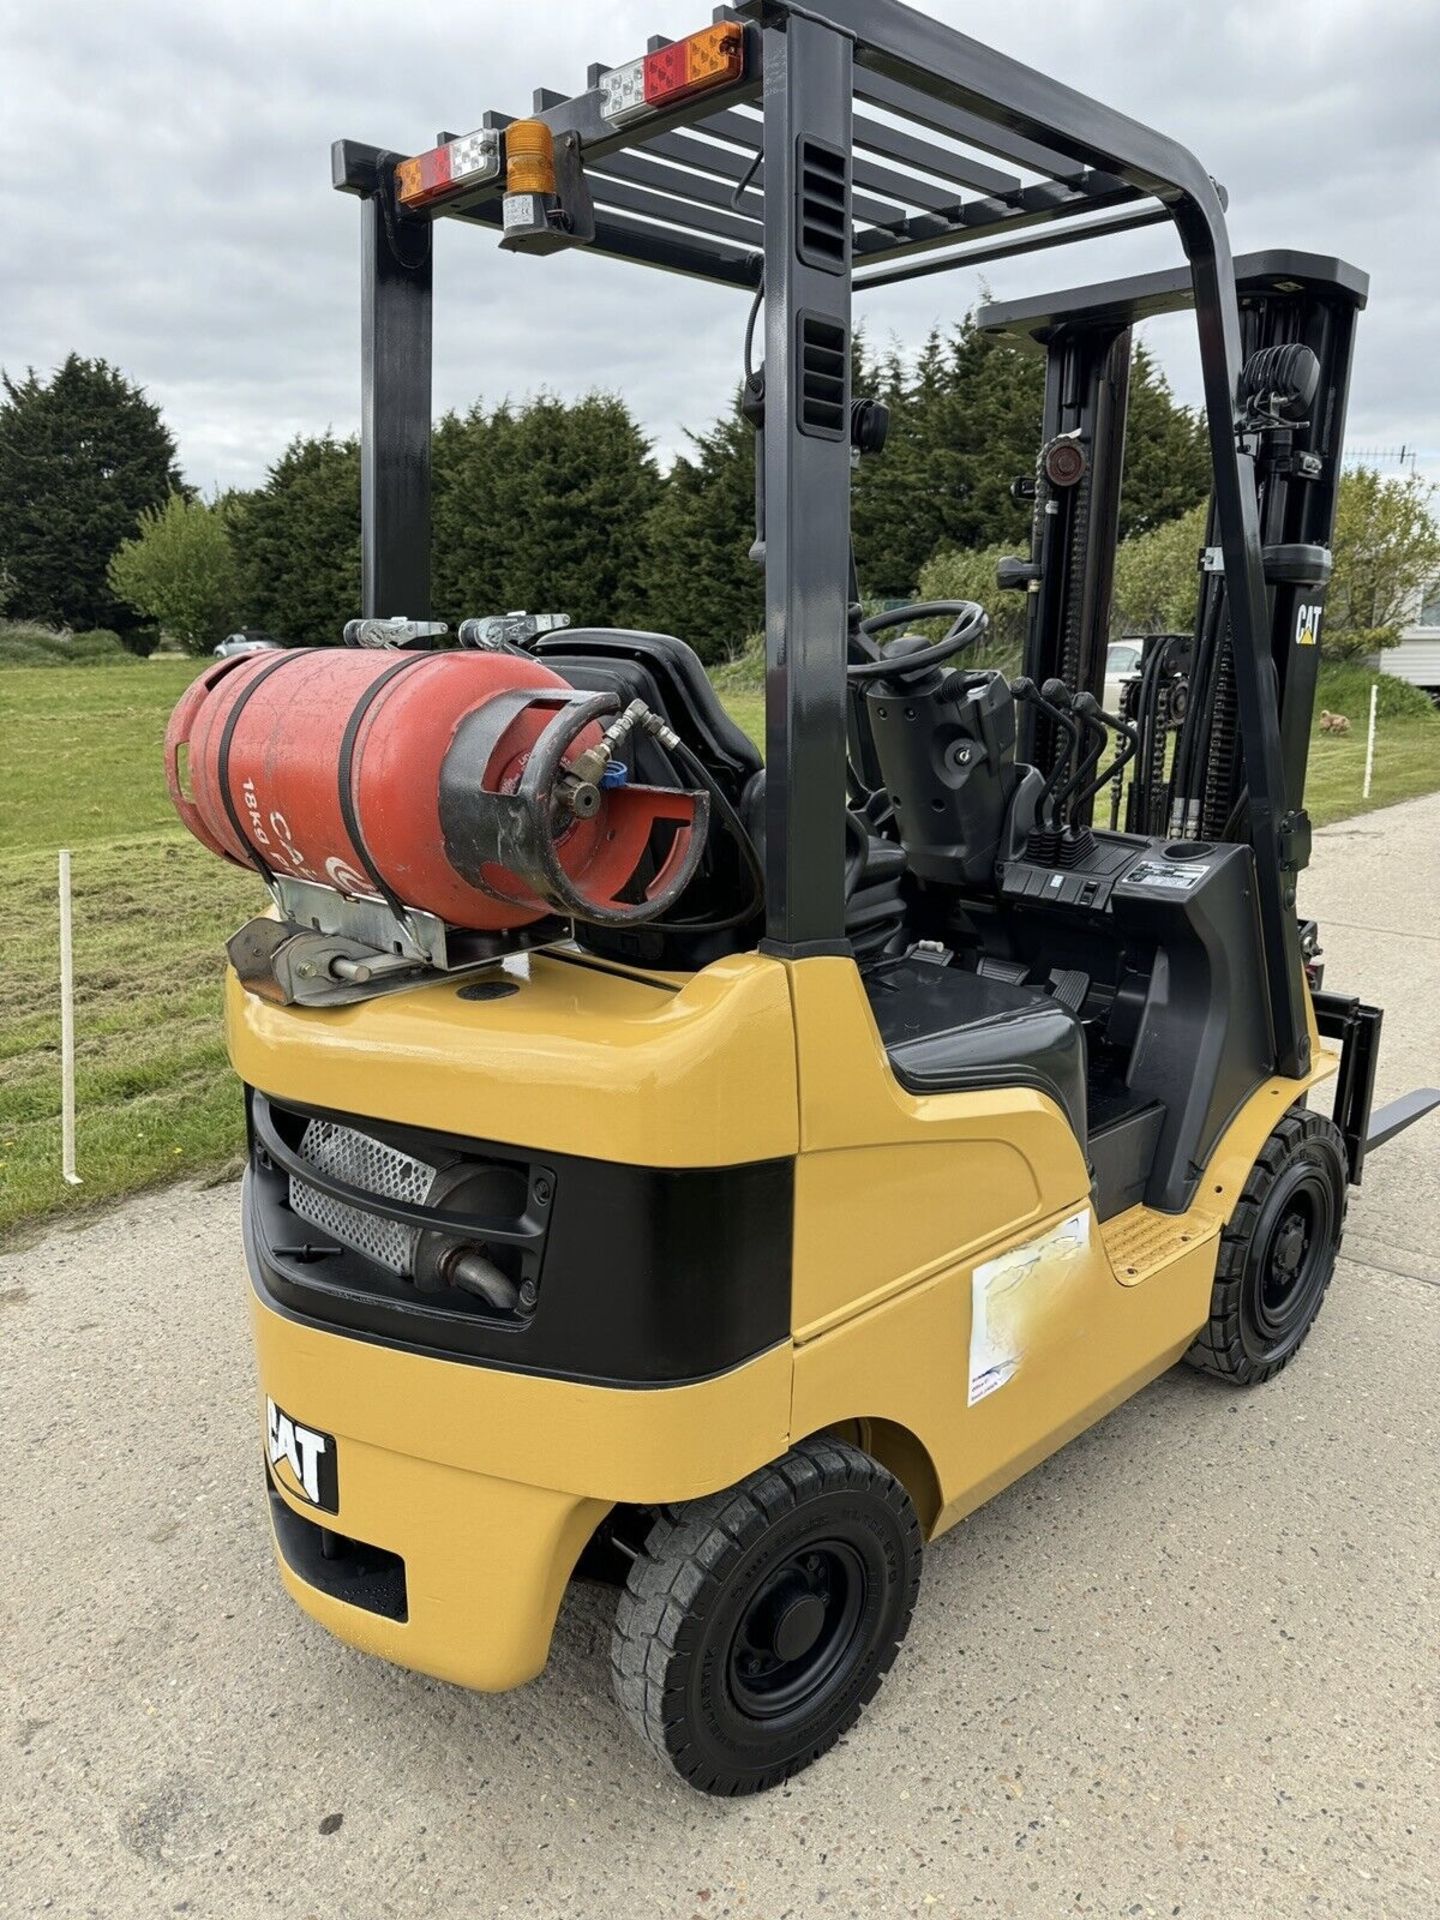 2016, CATERPILLAR - 1.5 Tonne Gas Forklift (Container / Triple Mast) - 3400 Hours - Image 3 of 6